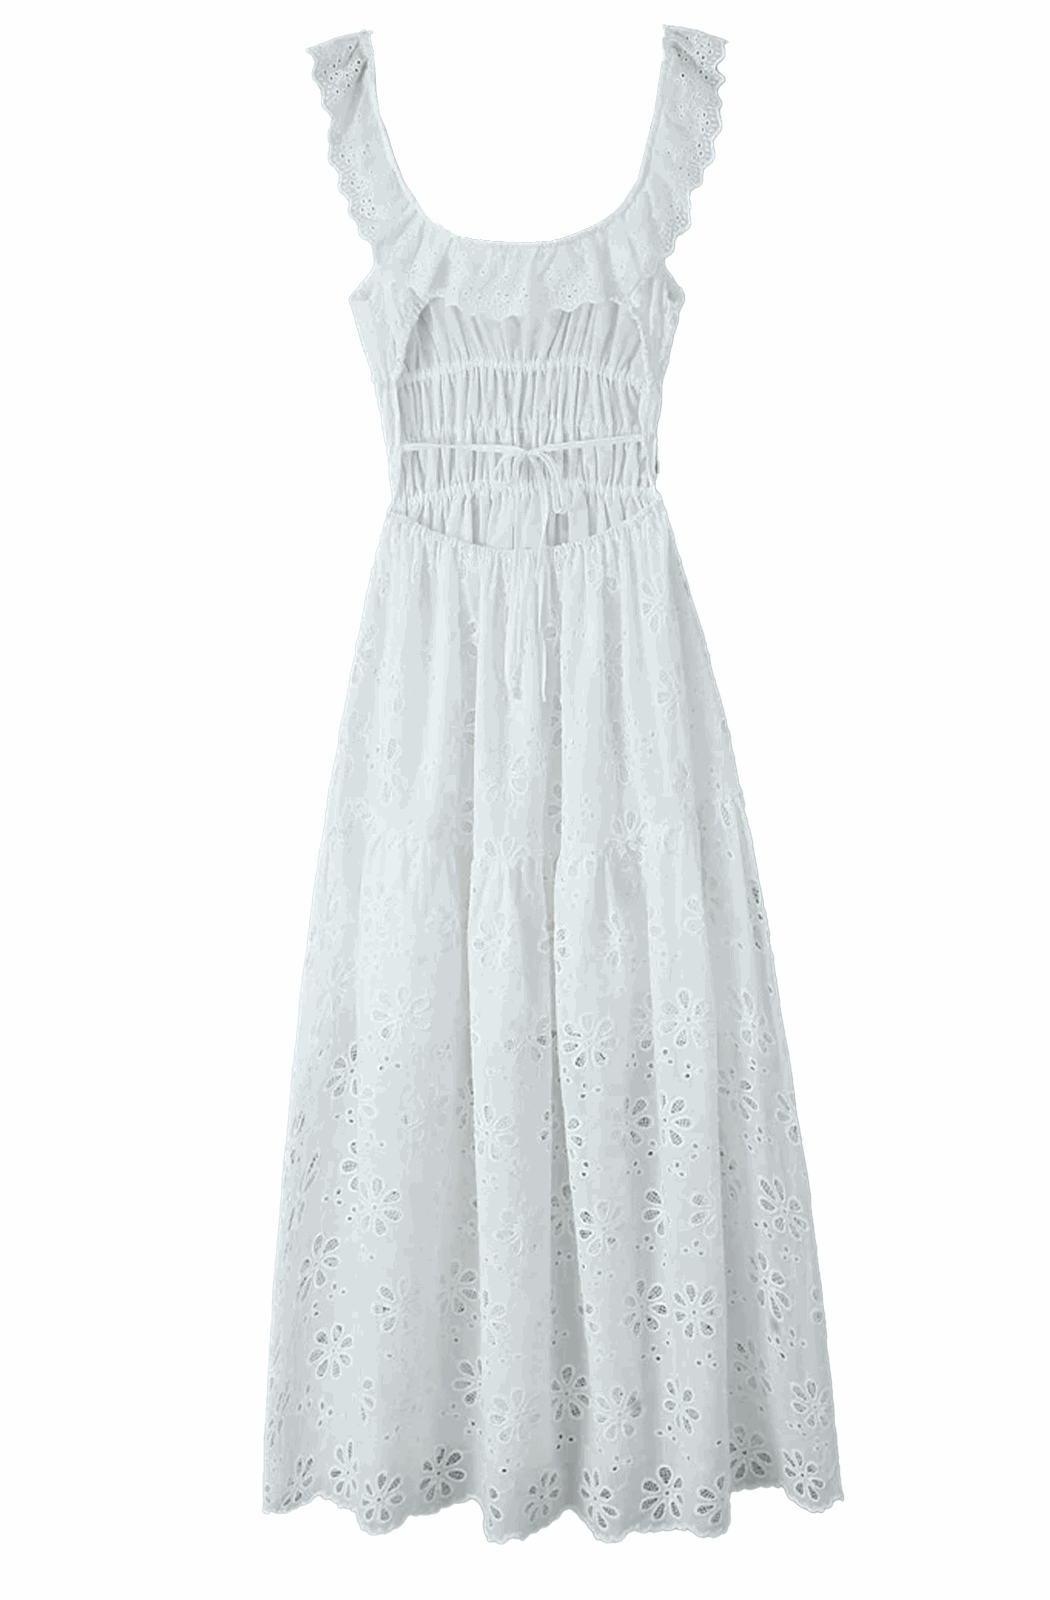 Boho white embroidery hollow out maxi dress